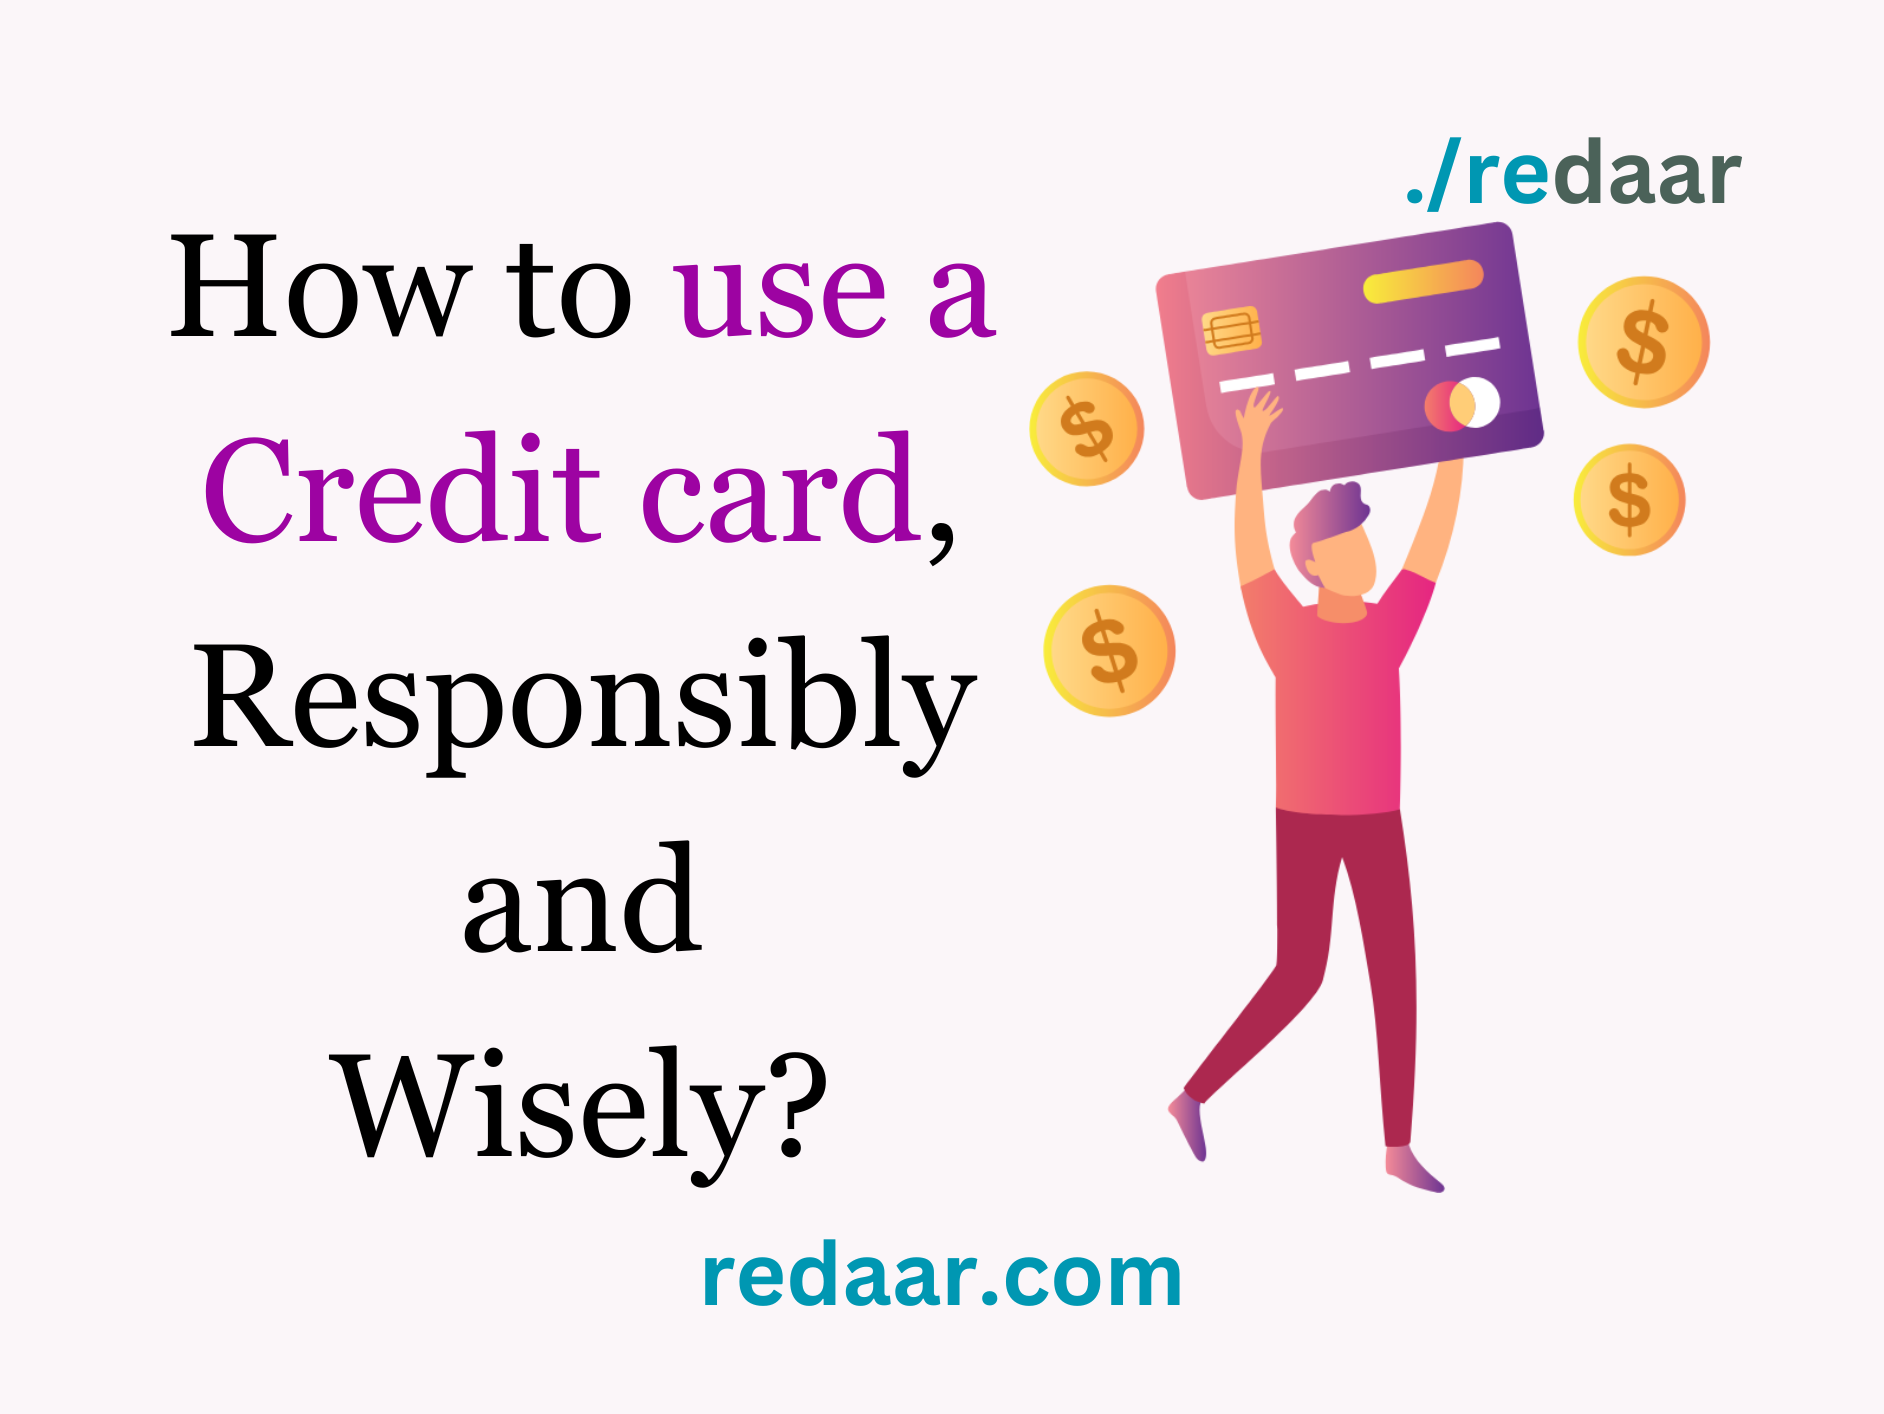 How to use a Credit card, Responsibly and Wisely?